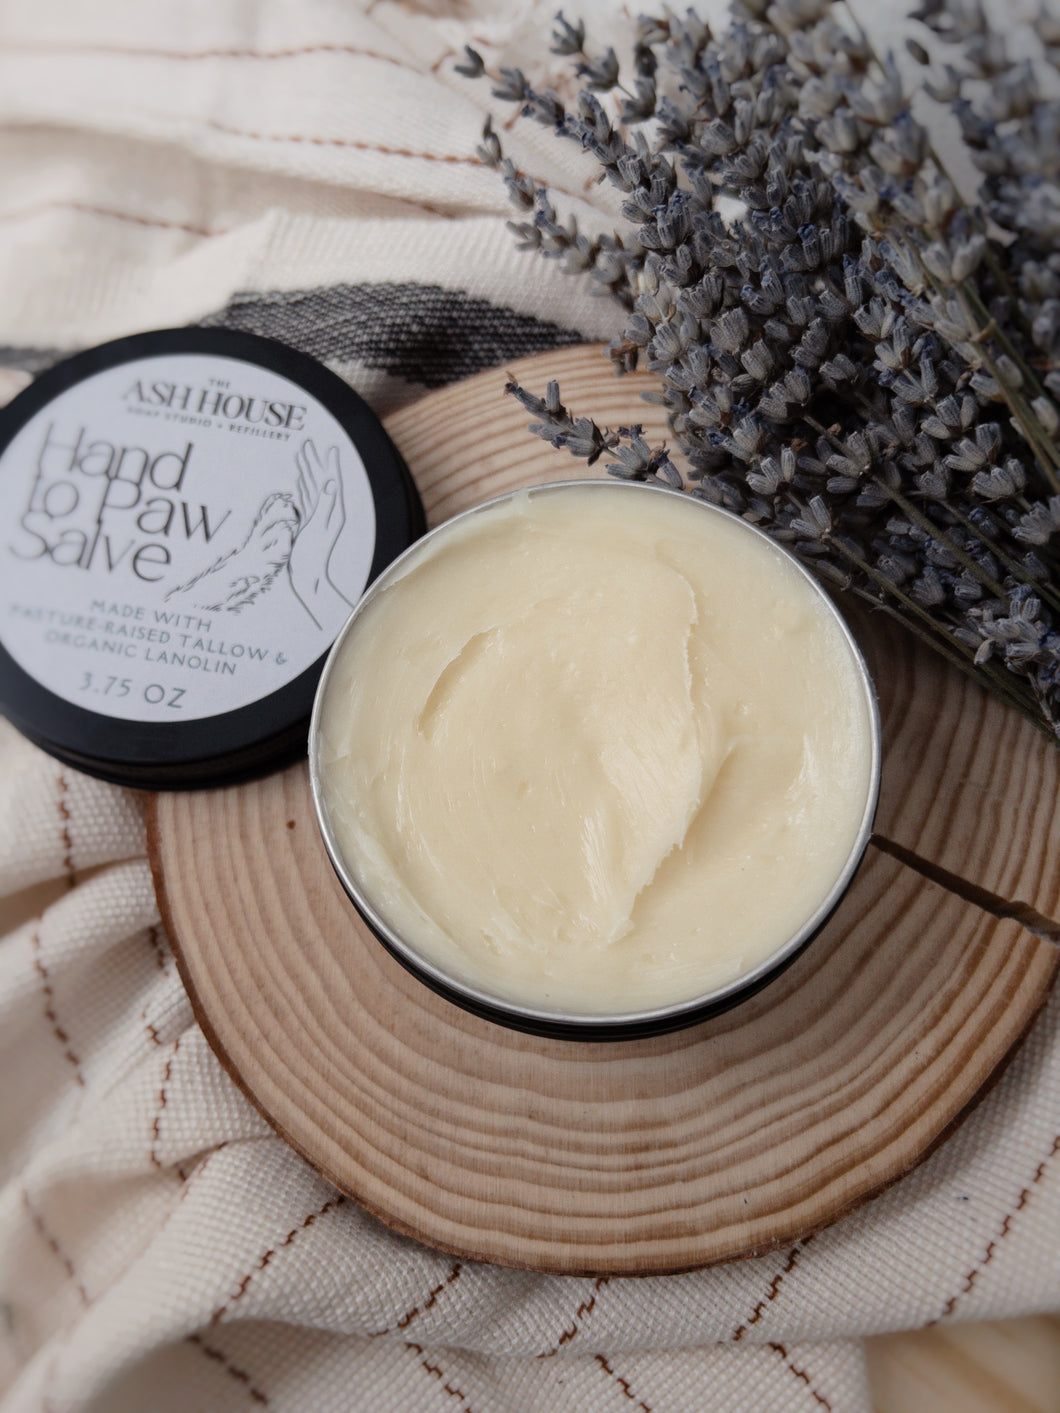 Hand to Paw Tallow & Lanolin Healing Salve with Lavender